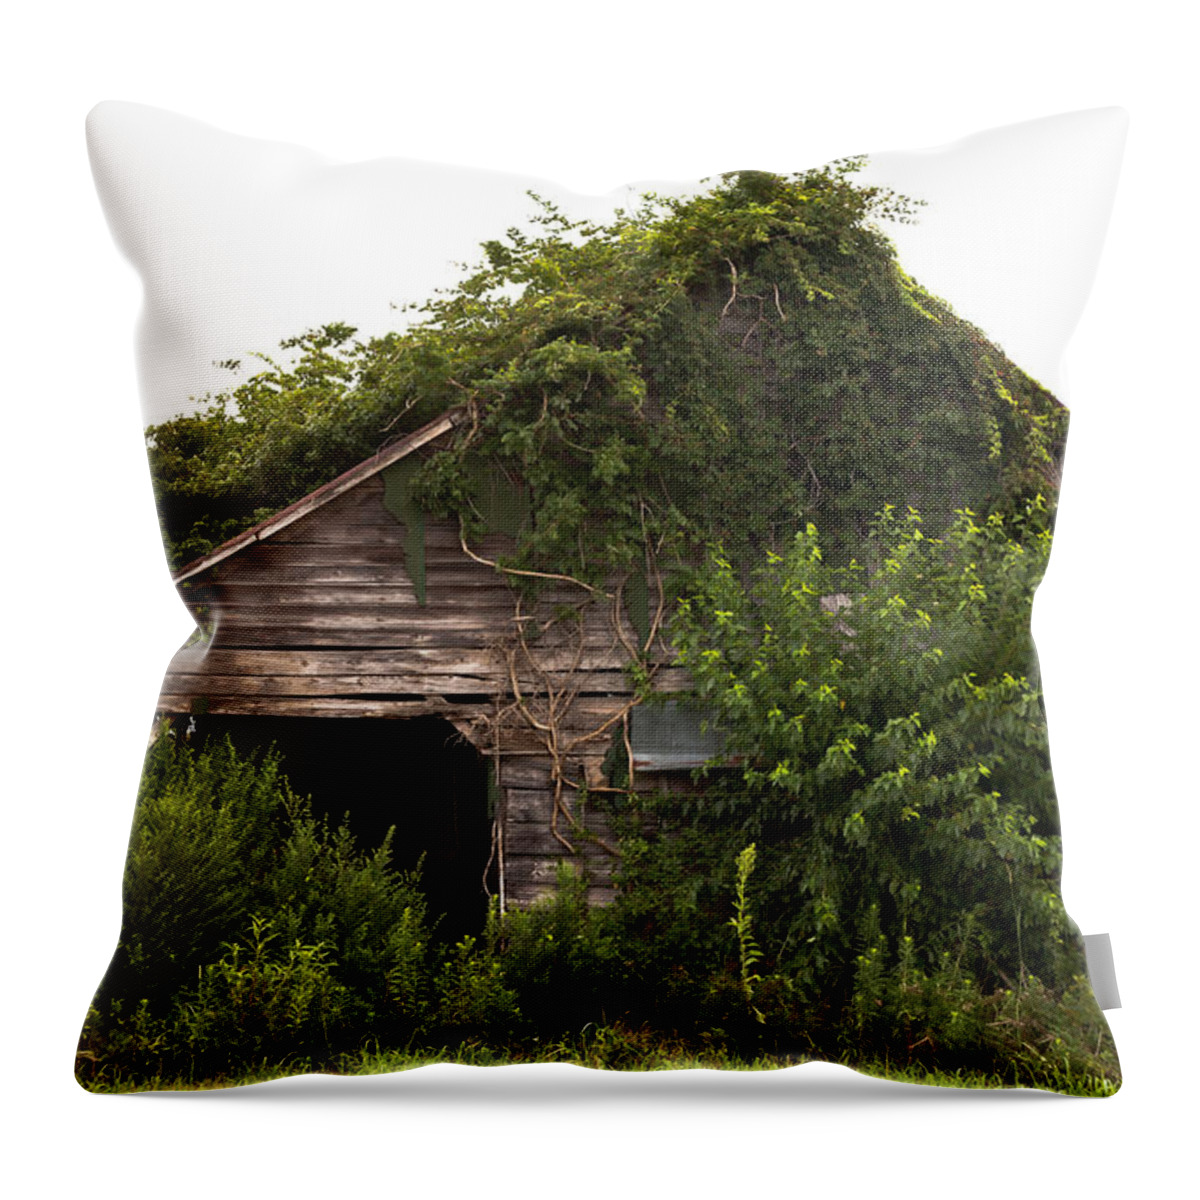 Barn Throw Pillow featuring the photograph Overgrown by Green by Jo Ann Tomaselli